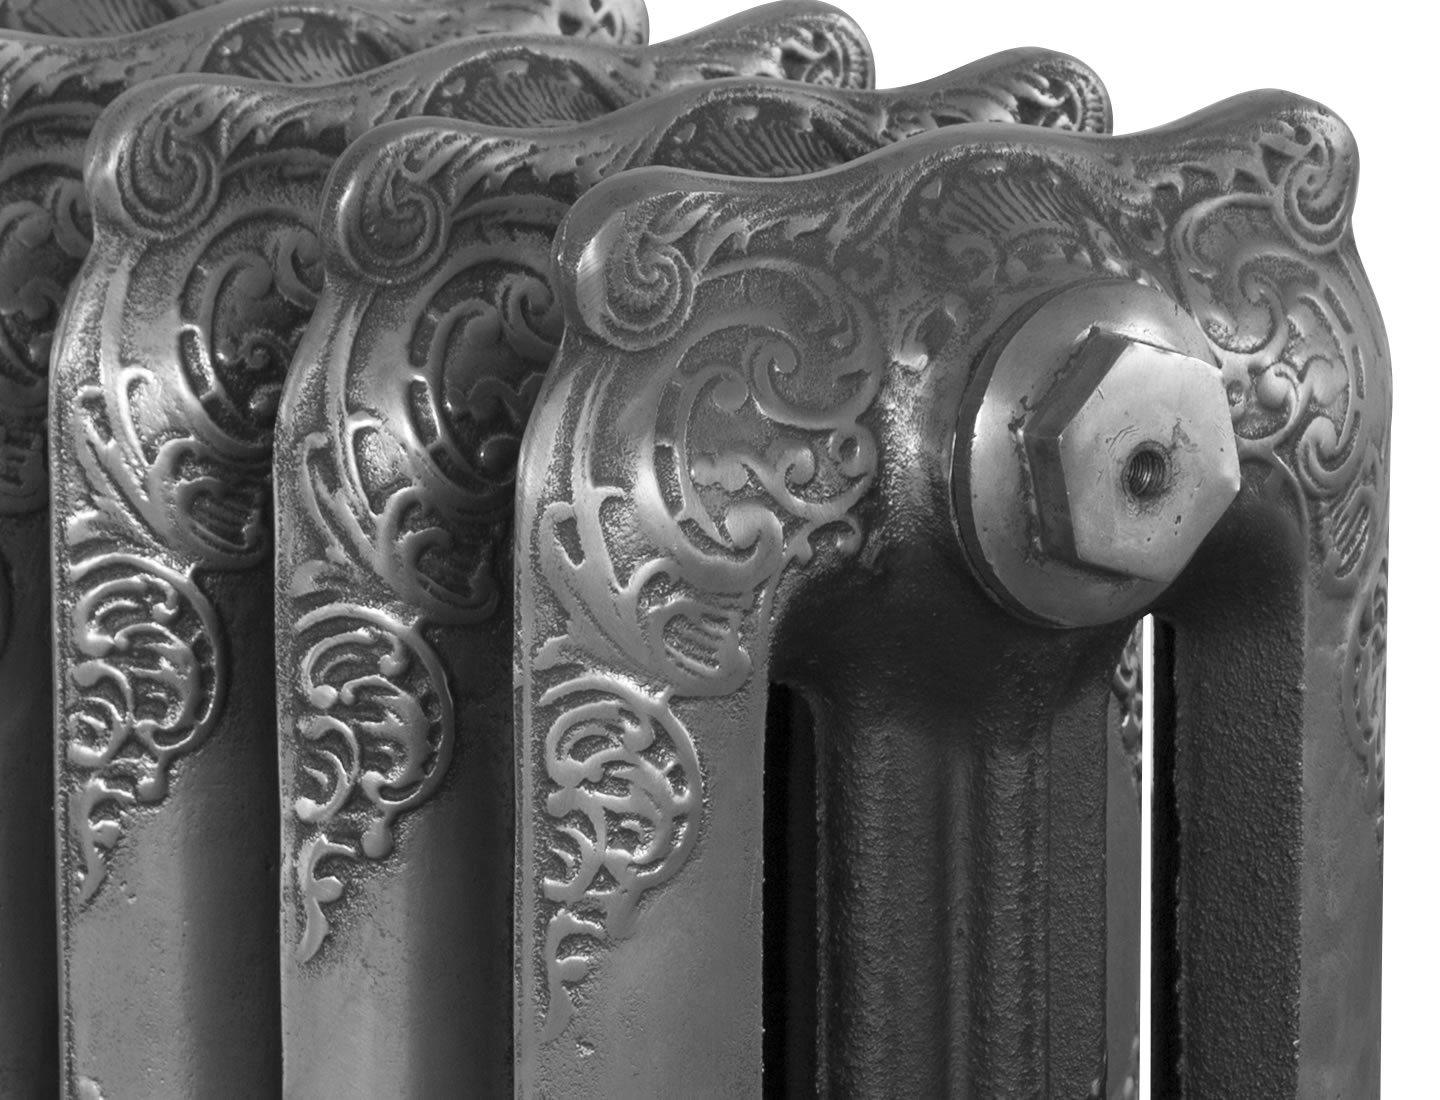 Rococo 3 Column 460Mm Cast Iron Radiator 10 Sections Hand Burnished With 3 Quarter Inch Bush Detail